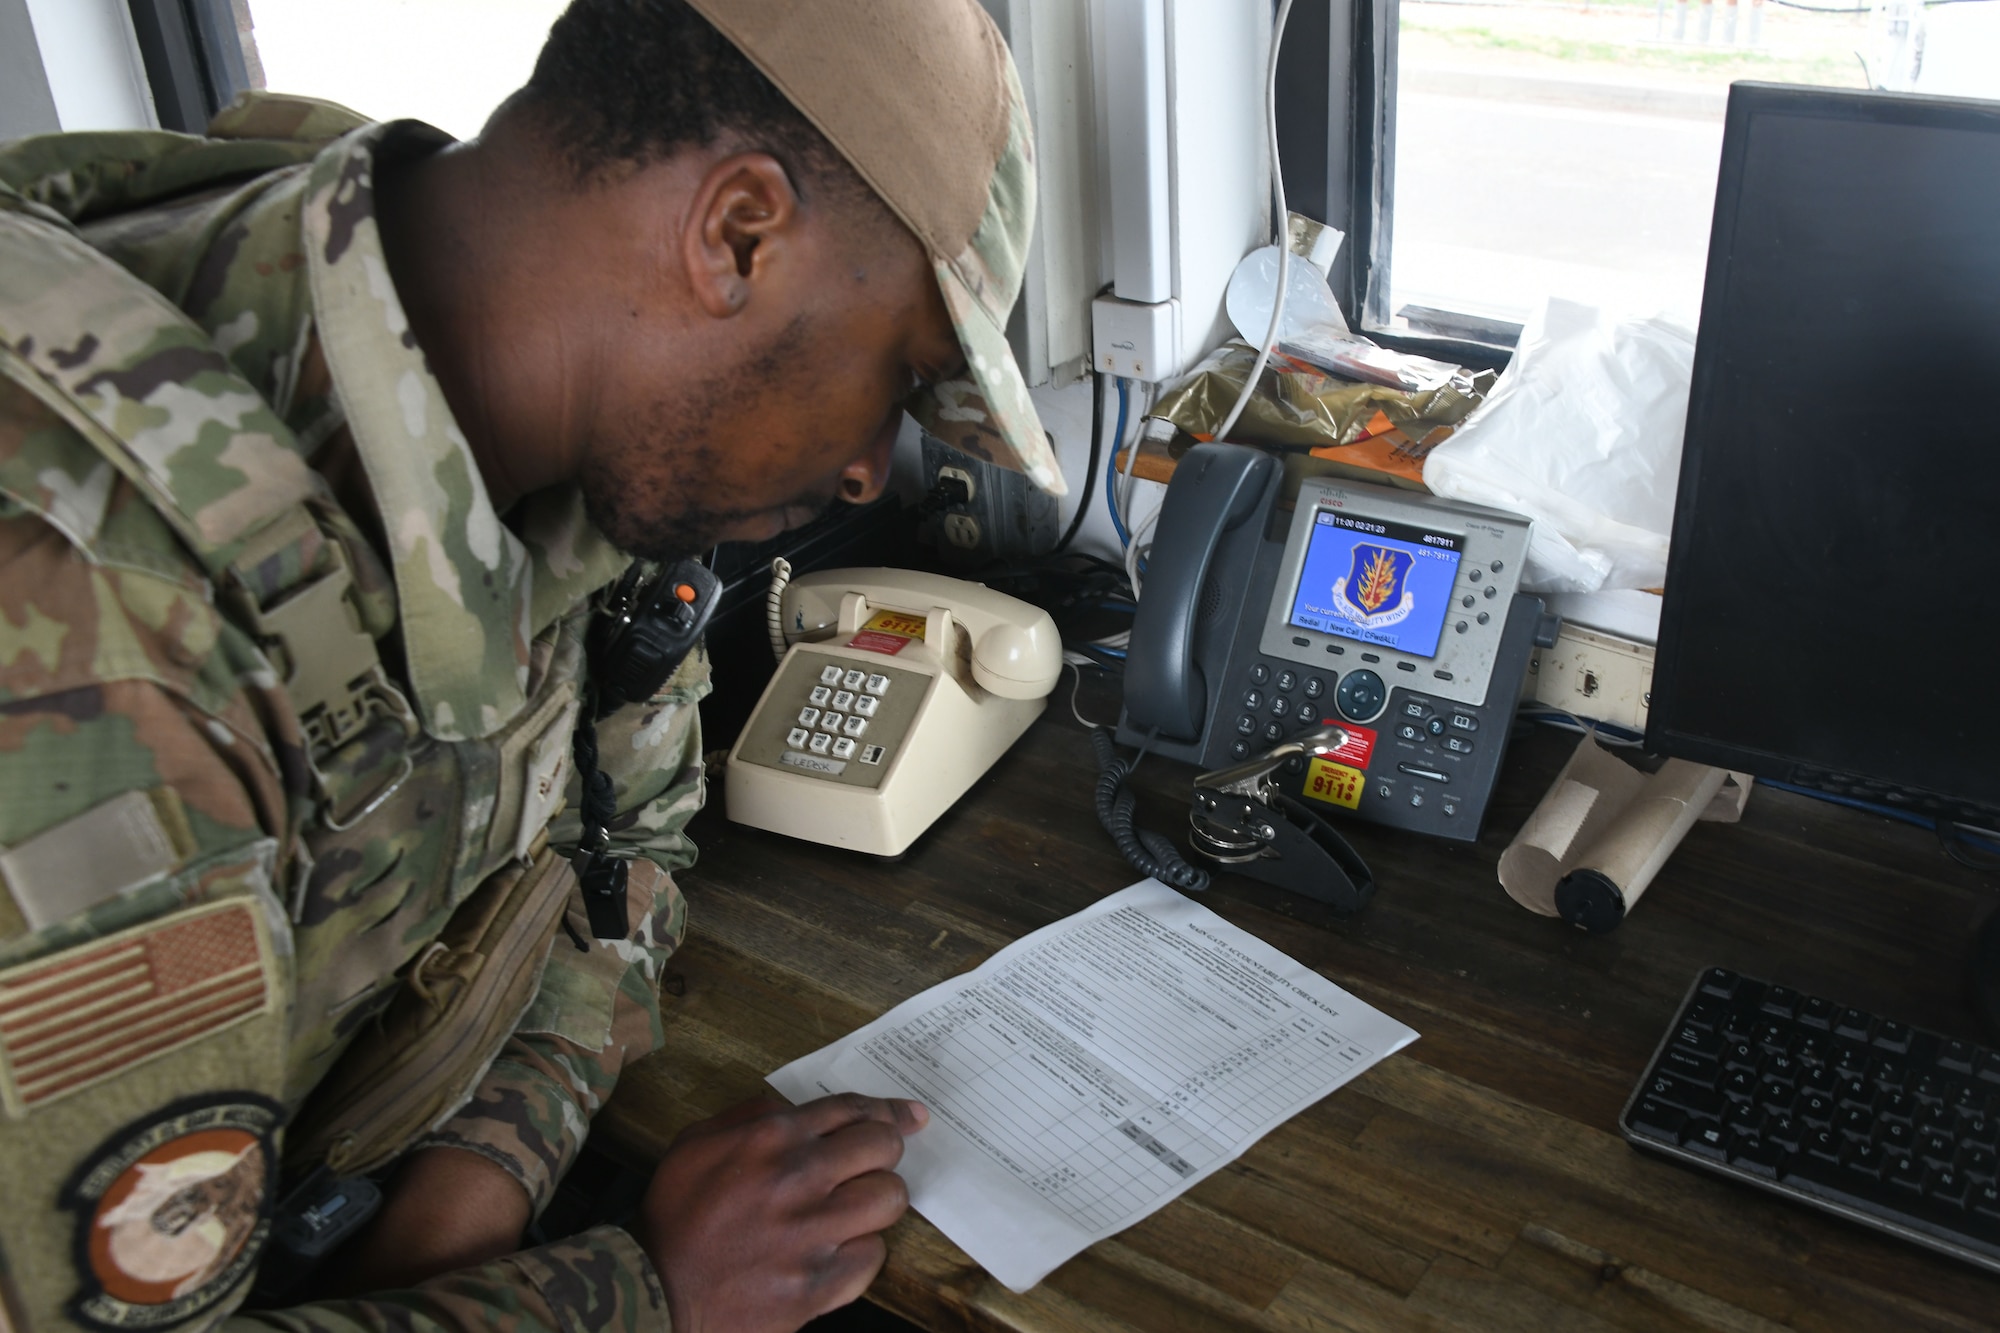 U.S. Air Force Airman 1st Class Michael Mason, 97th Security Forces Squadron patrolman, goes over an accountability checklist at Altus Air Force Base, Oklahoma, Feb. 21, 2023. Patrolmen defend the base’s personnel, equipment and resources on a day to day basis. (U.S. Air Force photo by Airman 1st Class Miyah Gray)